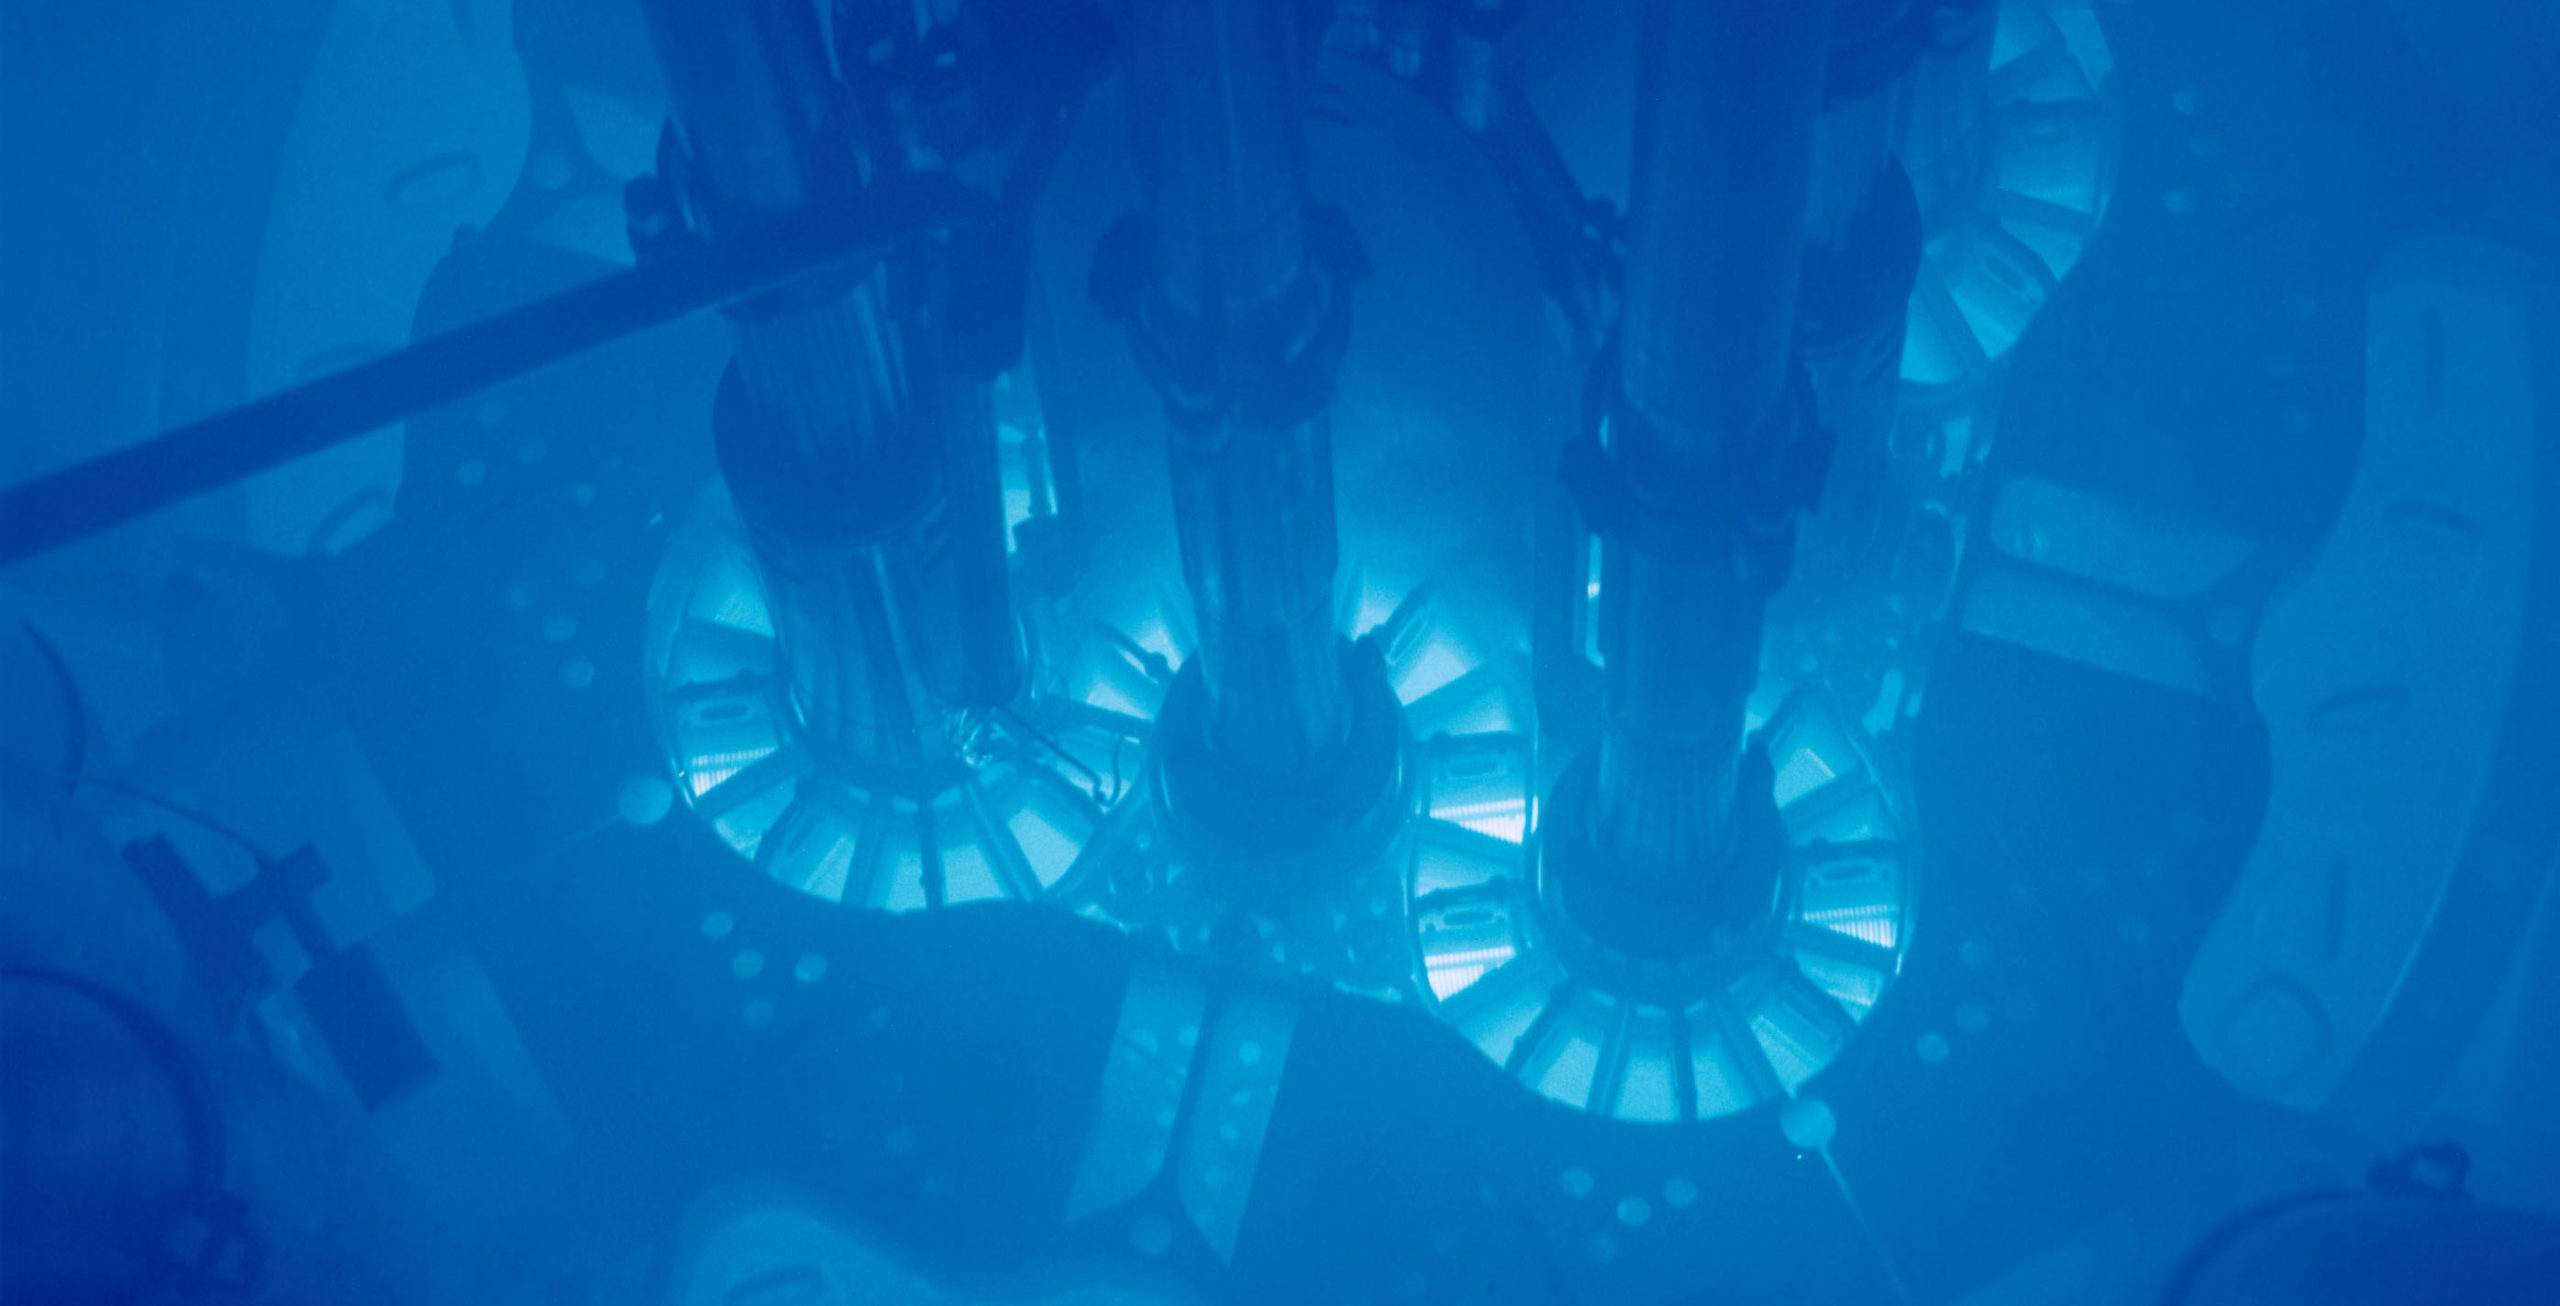 Nuclear fuel plates submerged in water, showing the blue light of Cherenkov radiation.